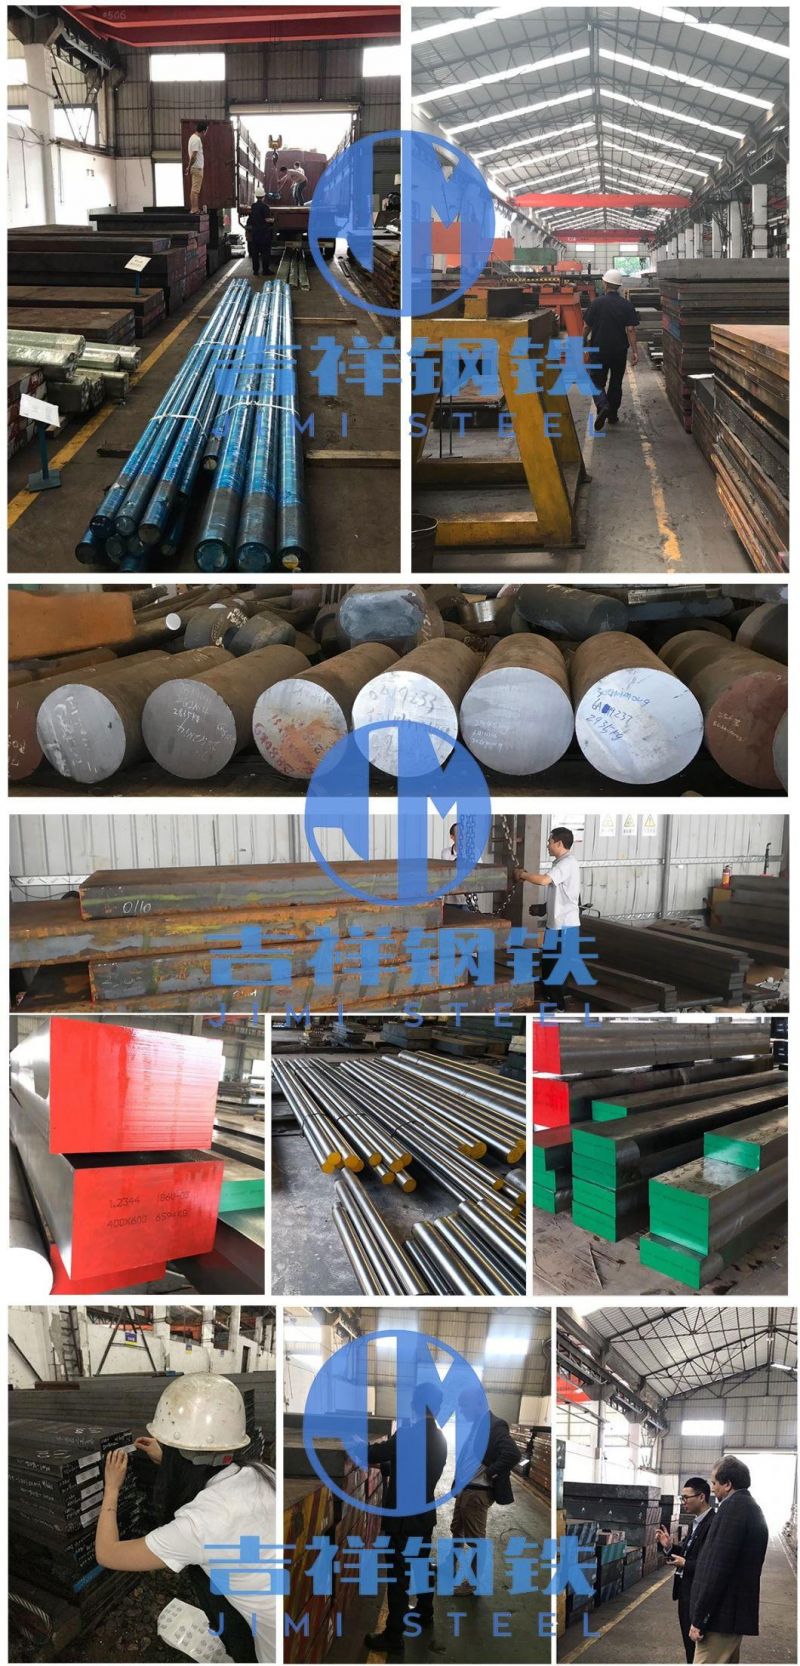 Good Quality Nak80 Steel Price in China Plastic Mold Steel Flat Bars to Make Mirror Steel Mold